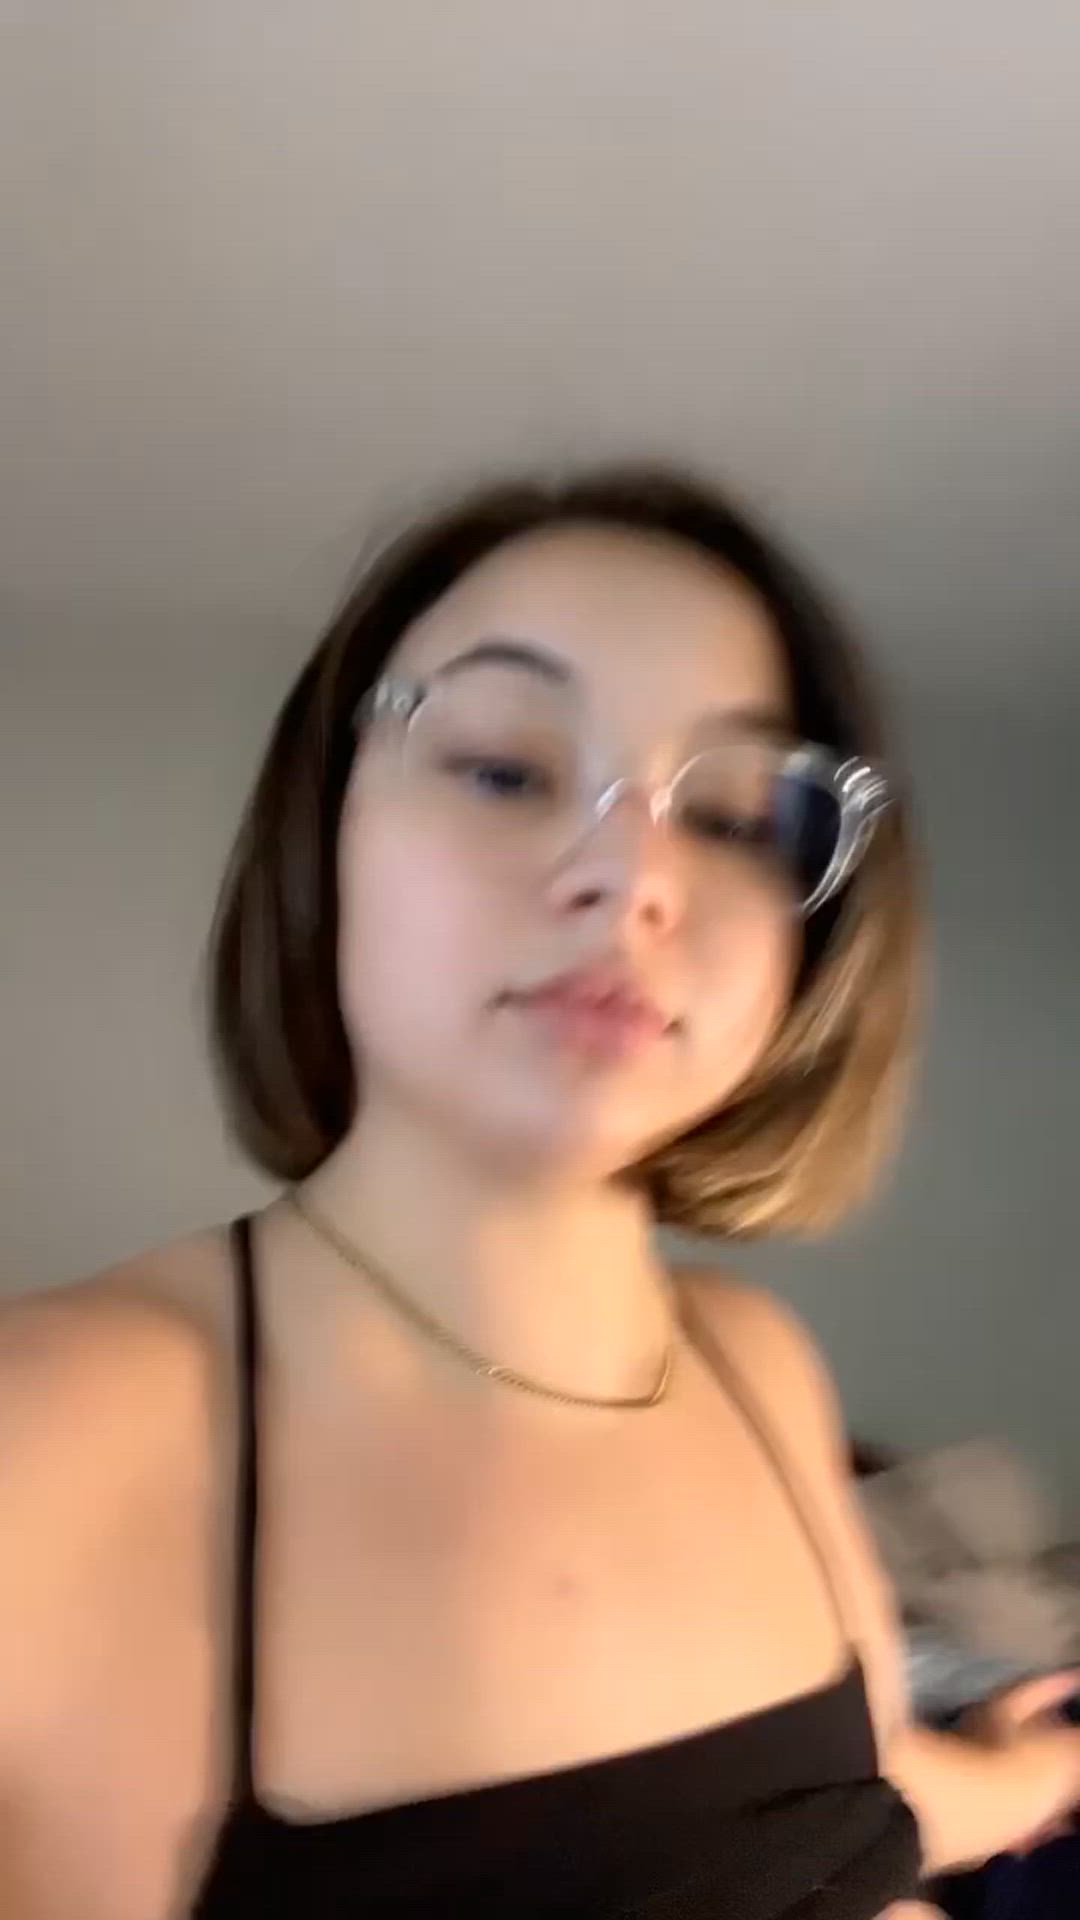 Homemade porn video with onlyfans model Shyy❤️ <strong>@nottooshyshy</strong>